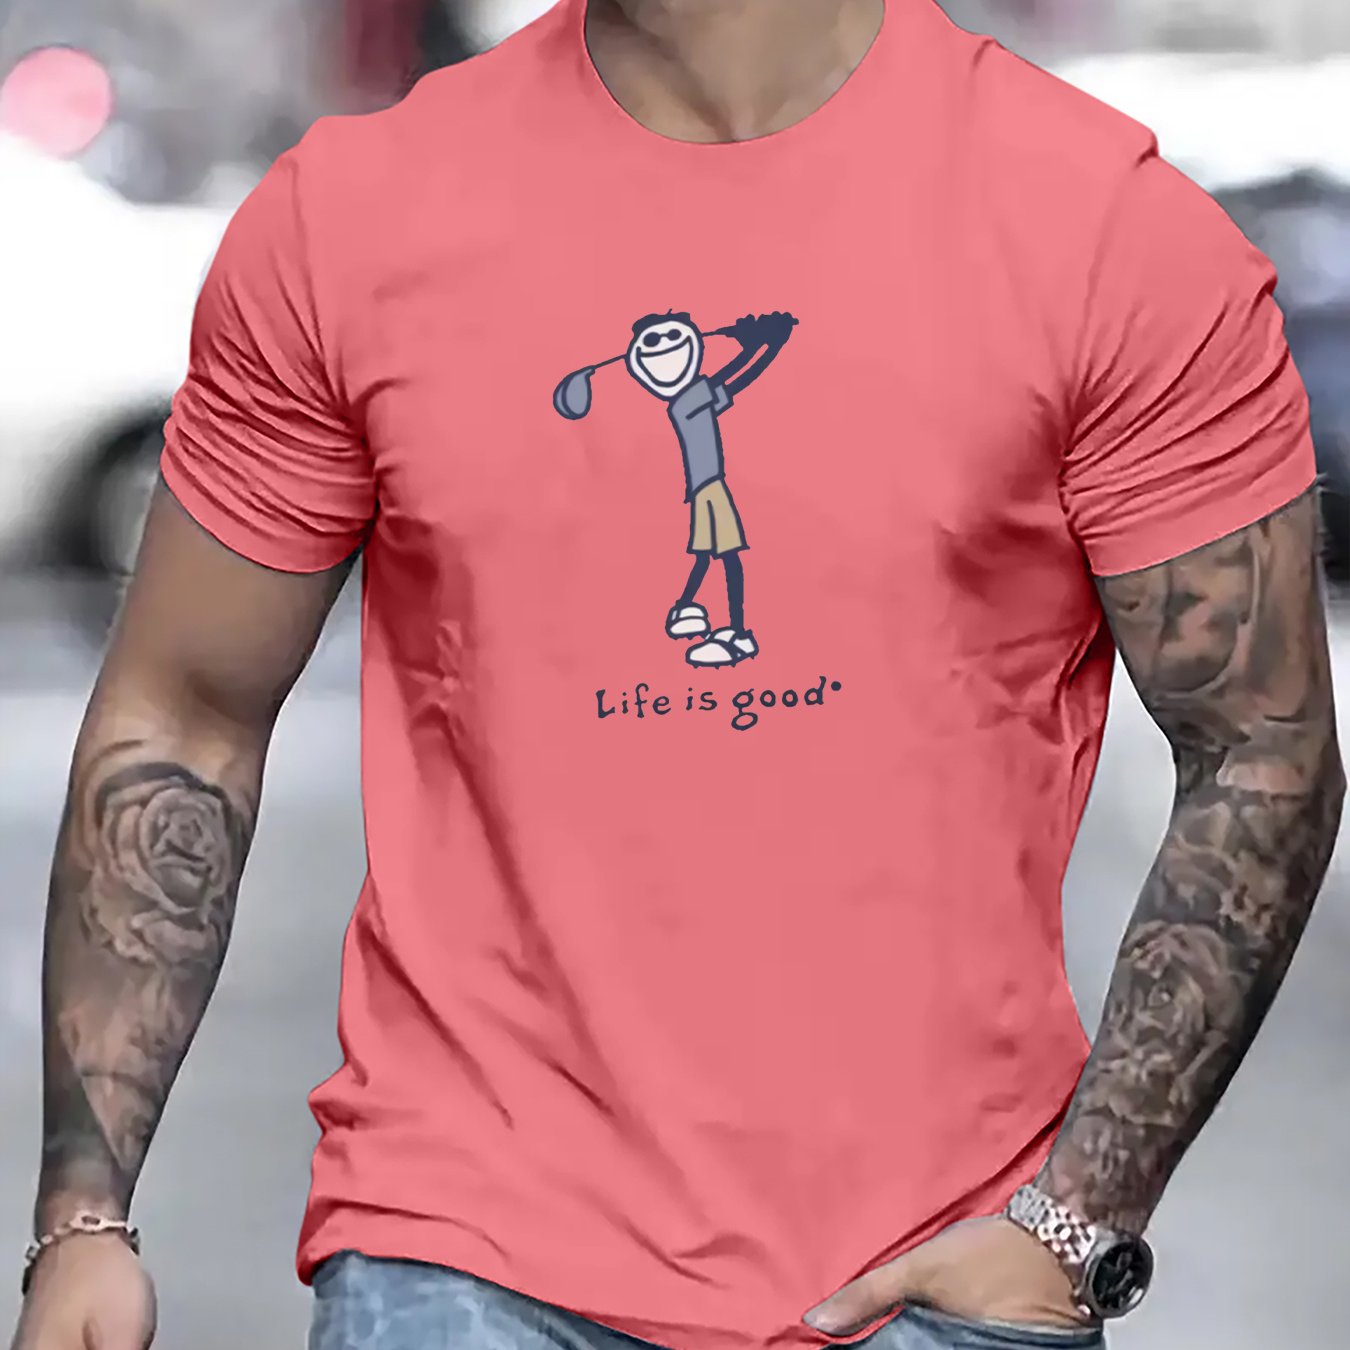 Life Is Good Print T Shirt, Tees For Men, Casual Short Sleeve T-shirt For Summer